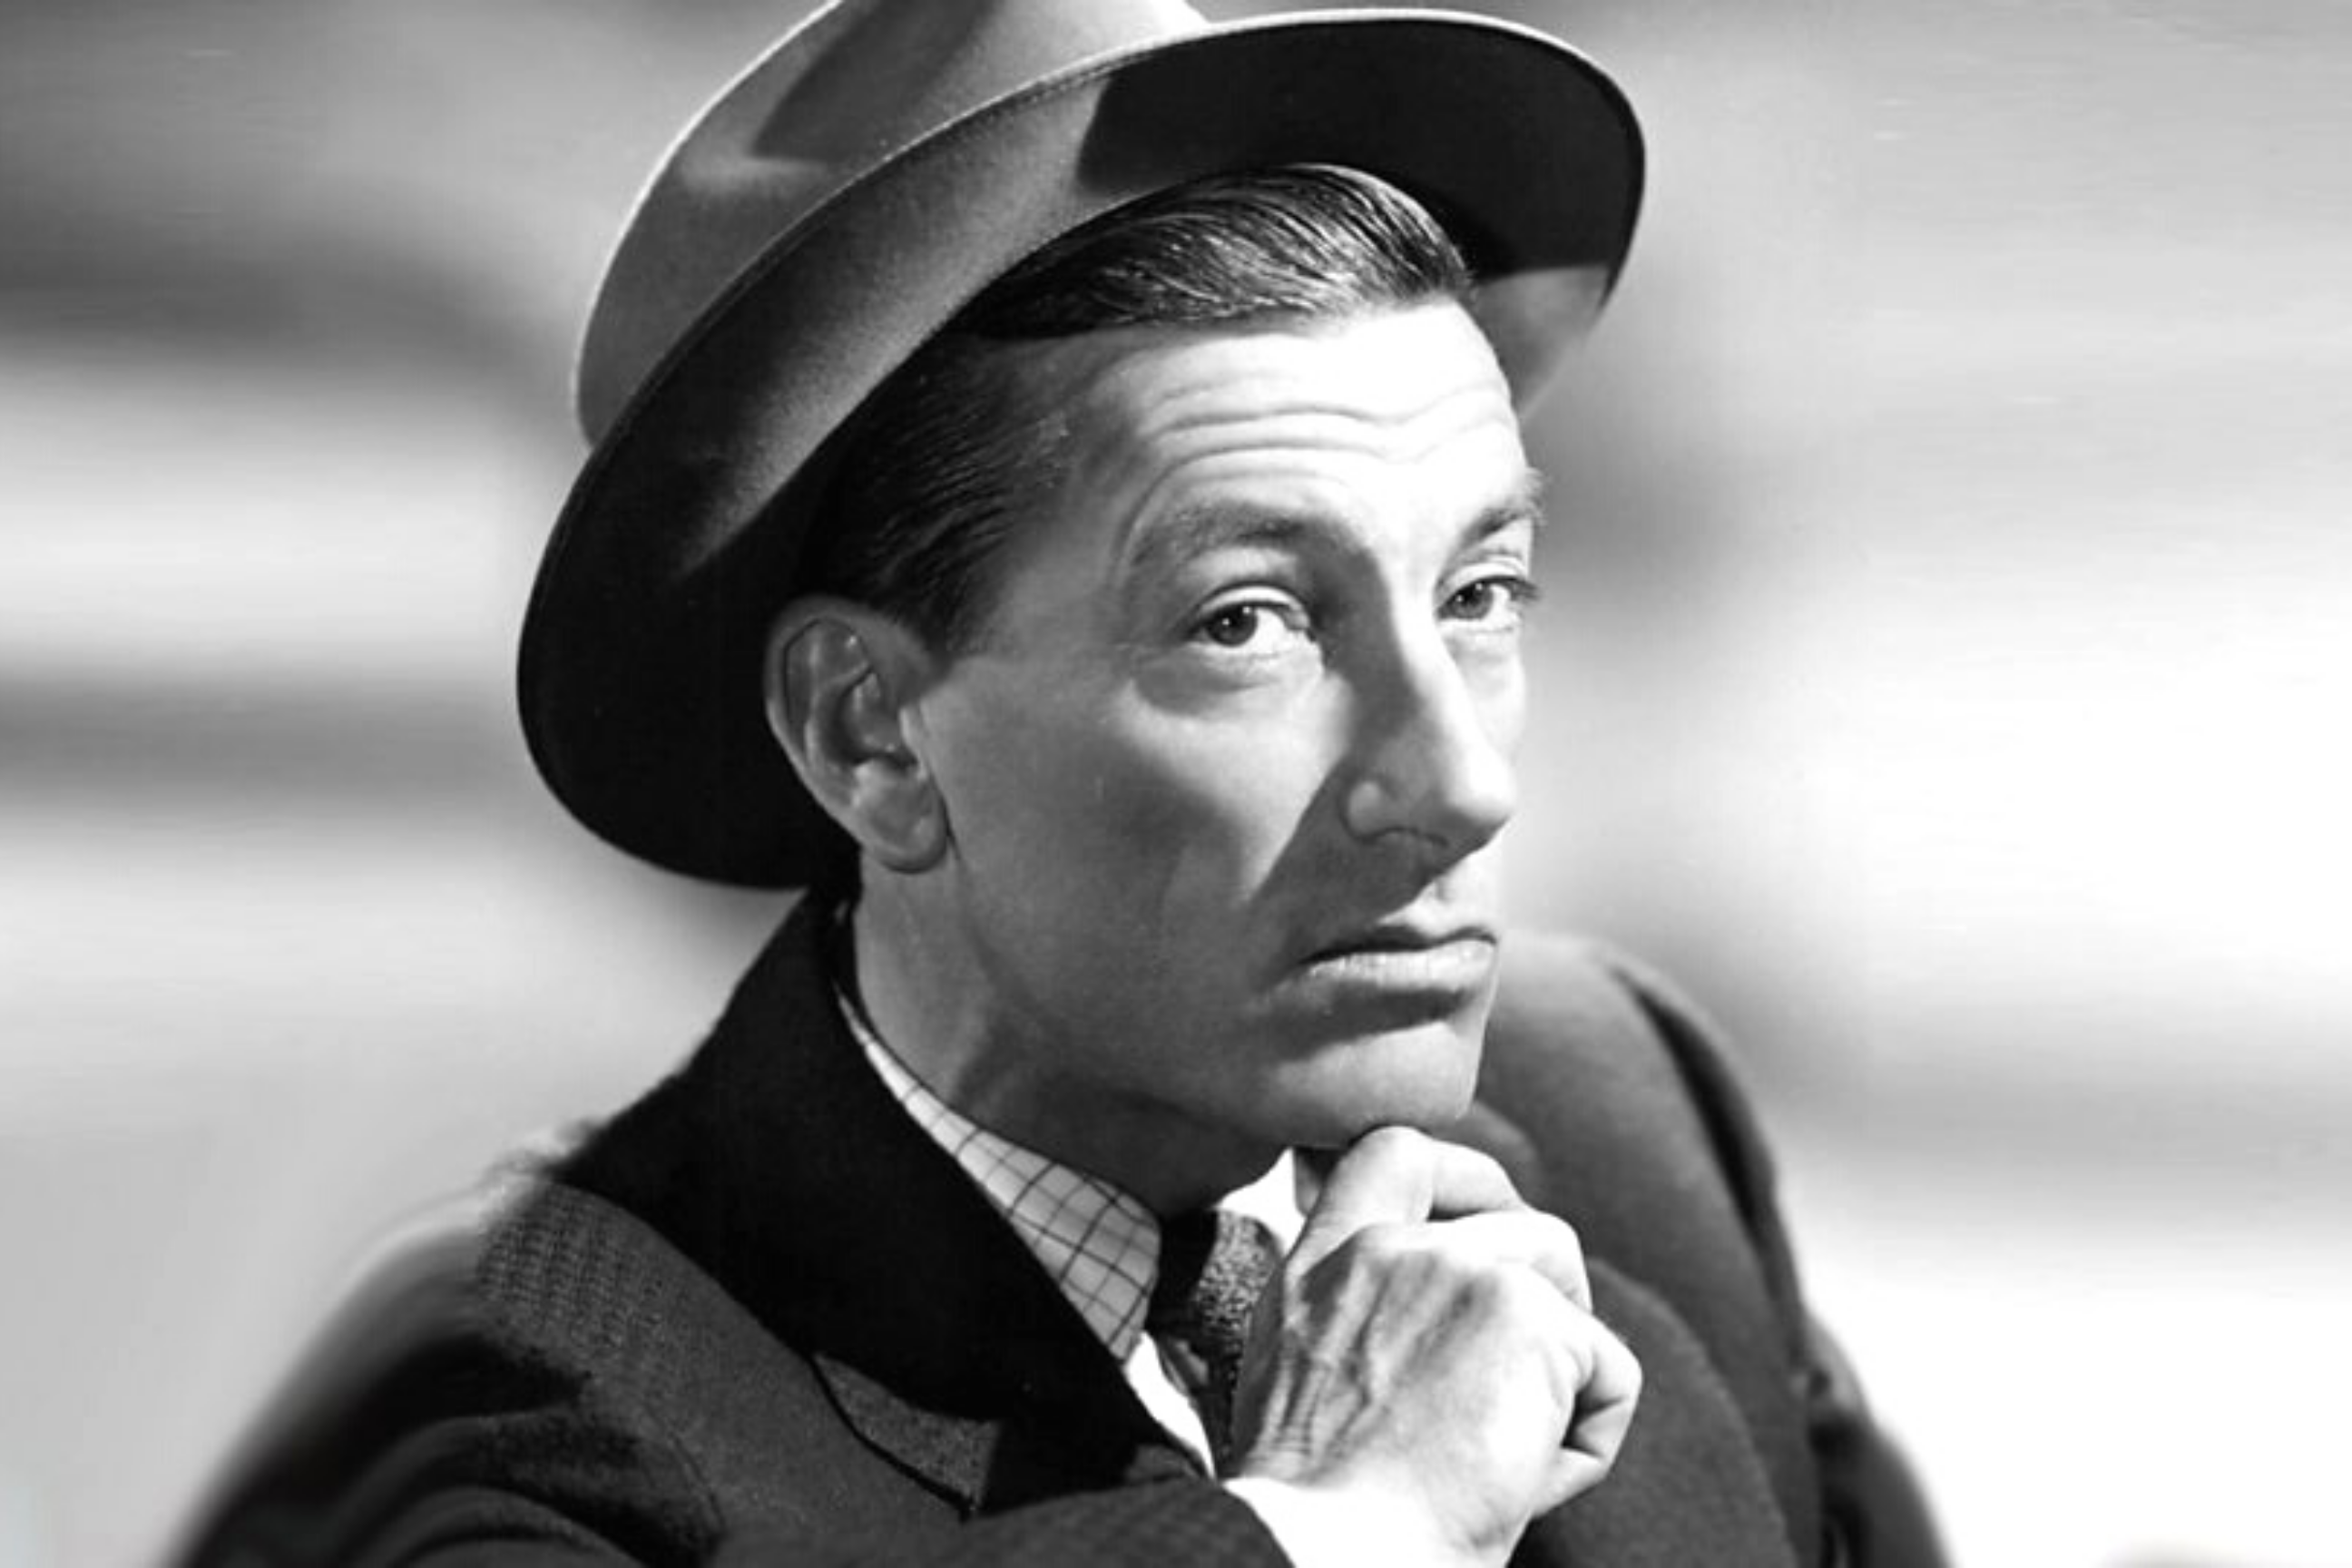 Hoagy Carmichael poses with his hand on his chin, an expressionless face, and a wide-brimmed hat.